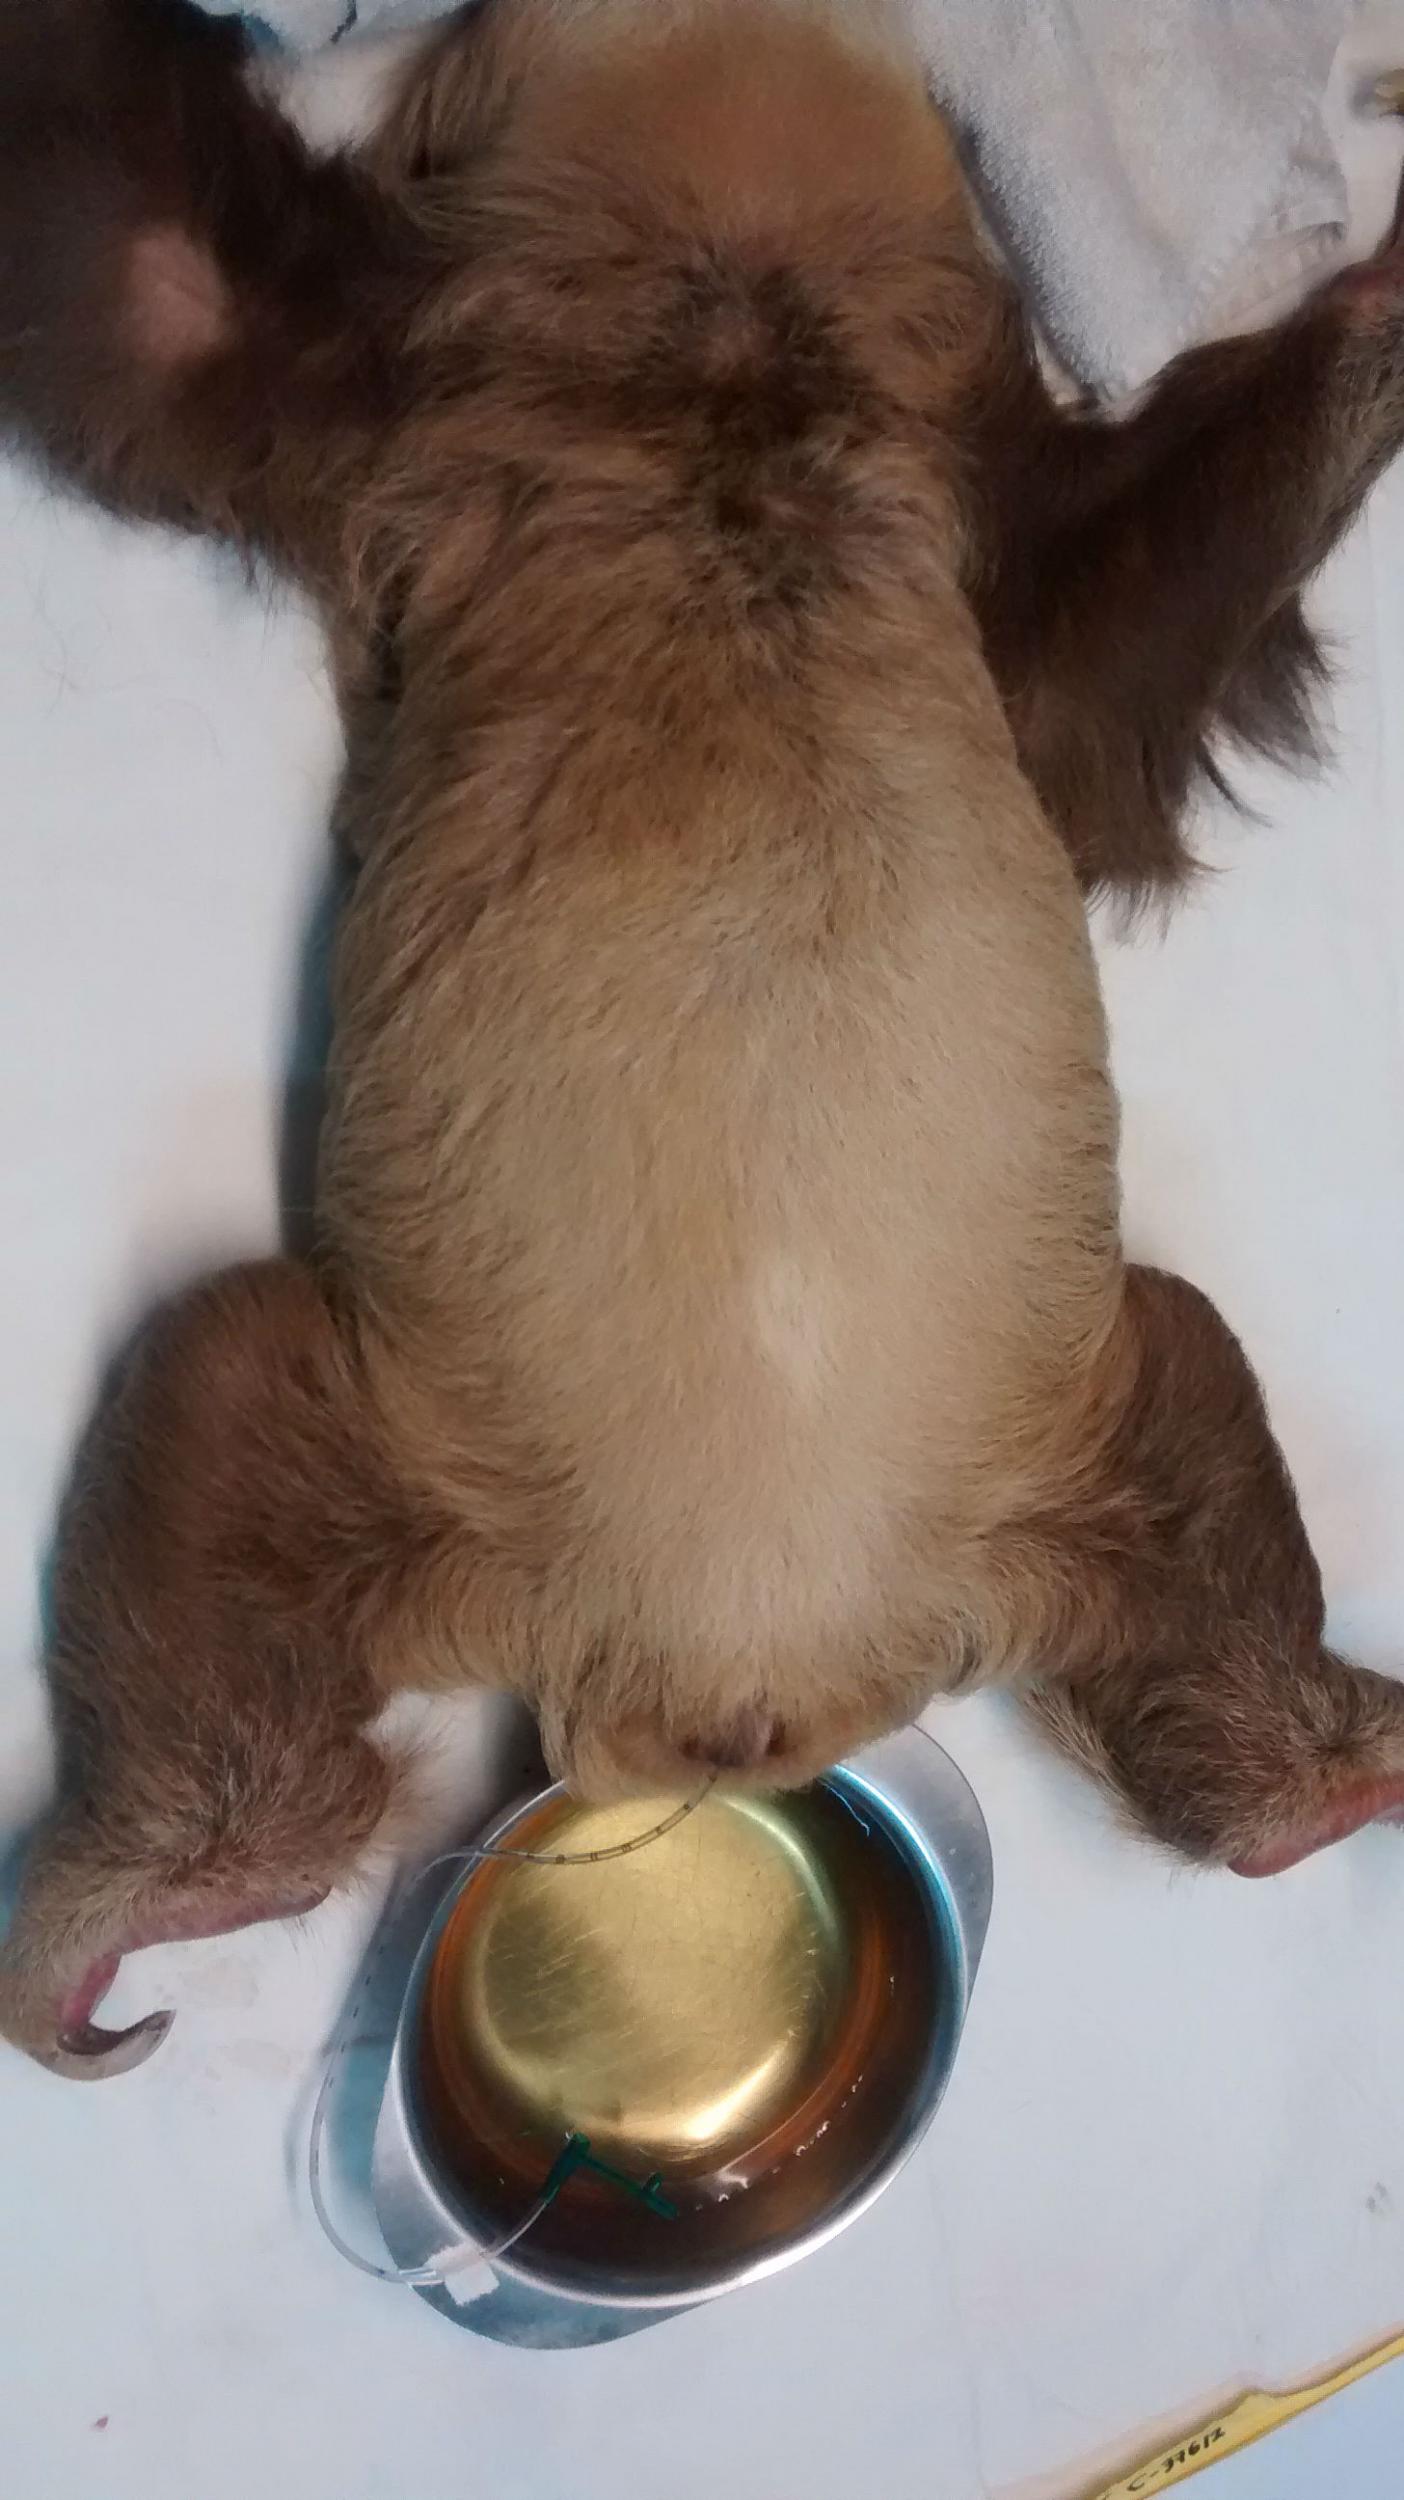 &#13;
A sloth with a catheter as it cannot urinate naturally &#13;